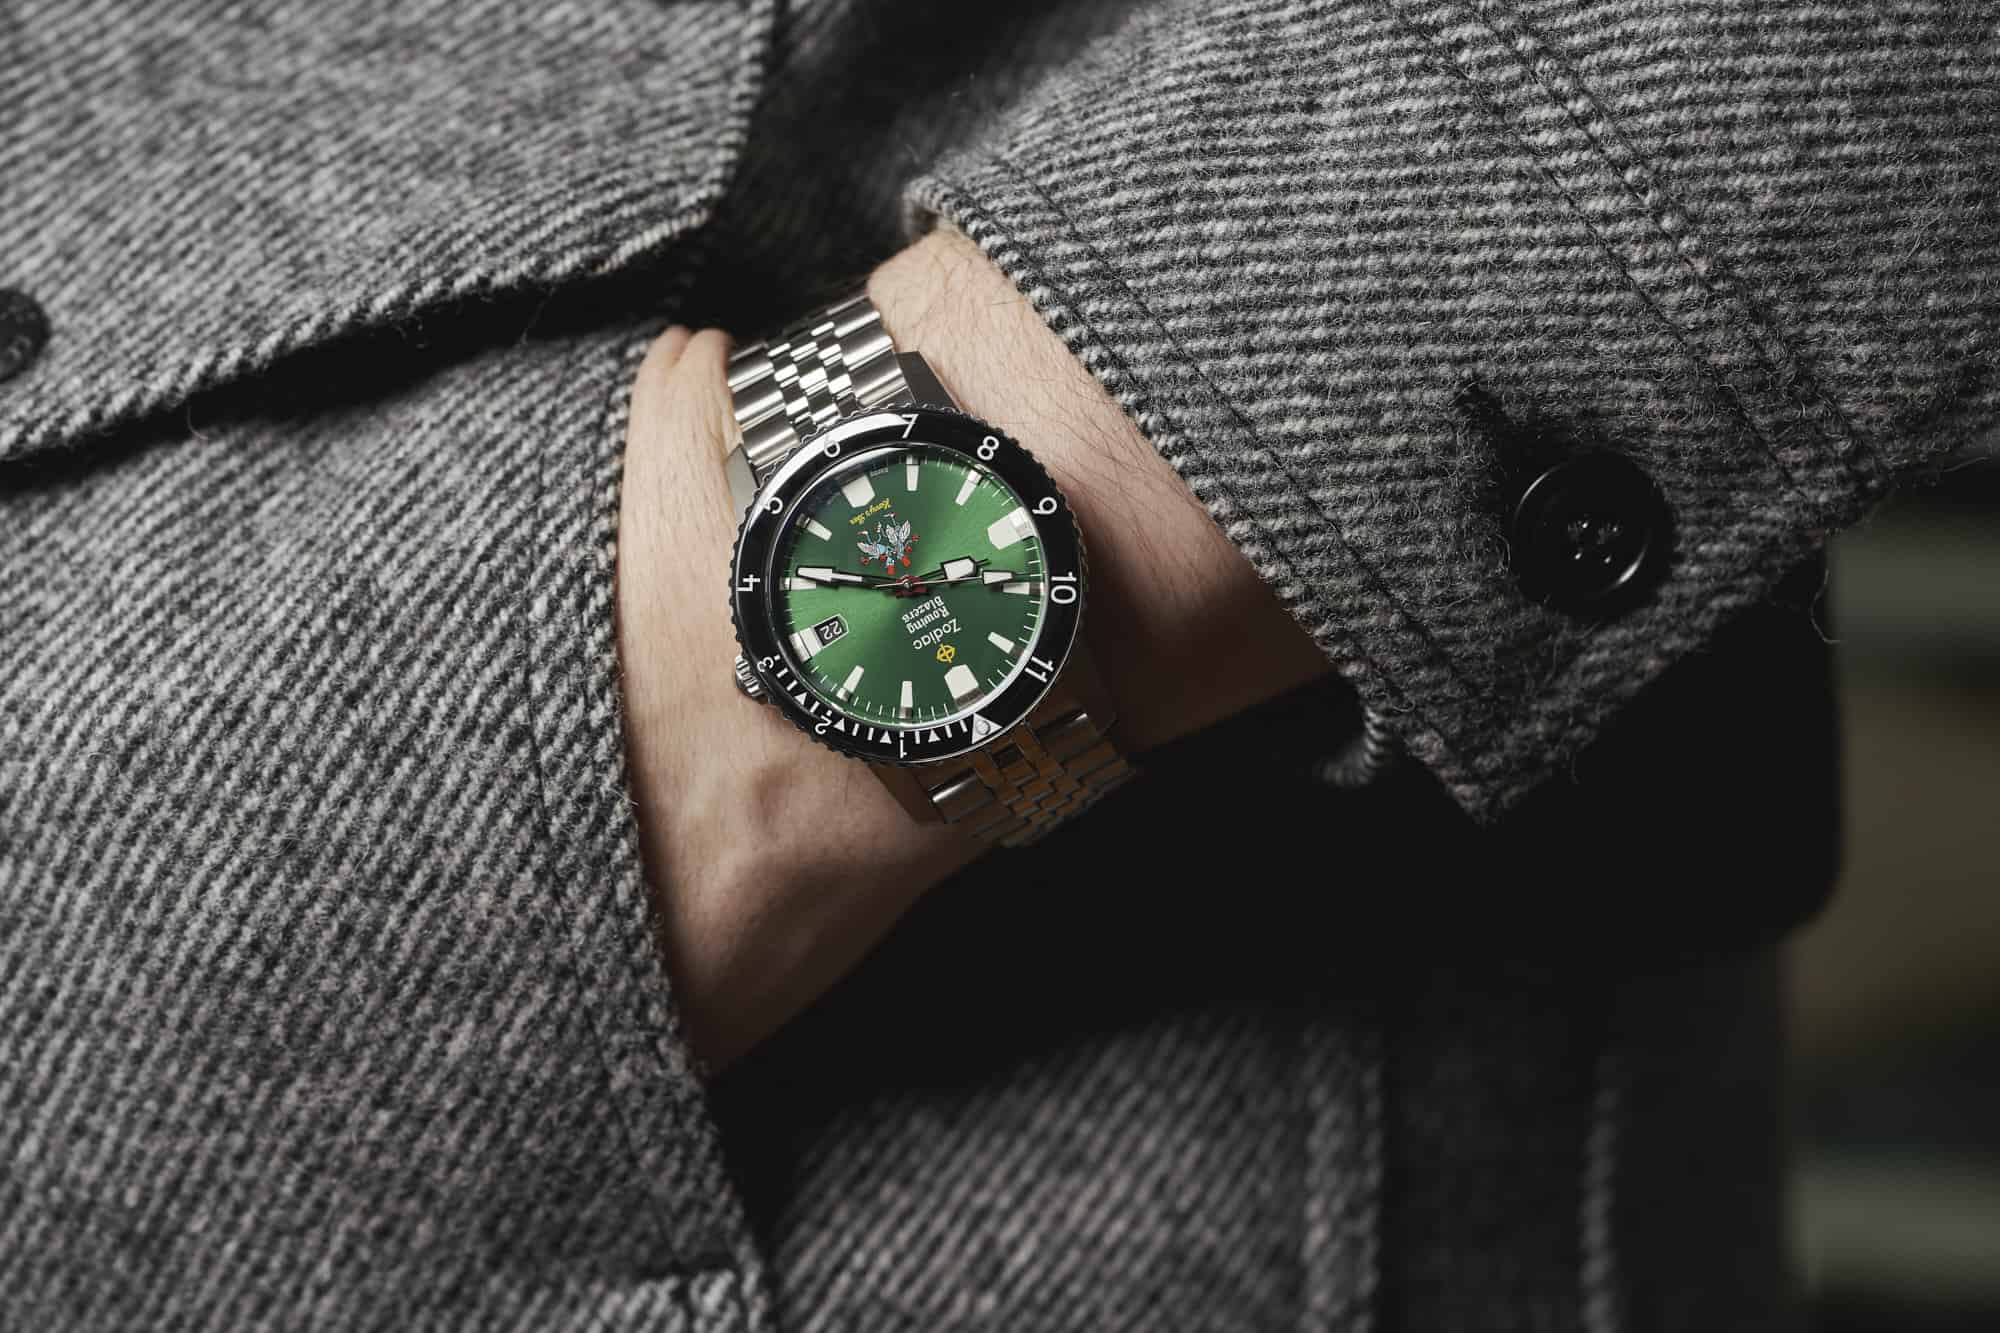 The Zodiac Super Seawolf x Rowing Blazers Limited Edition – Now Available In The Windup Watch Shop